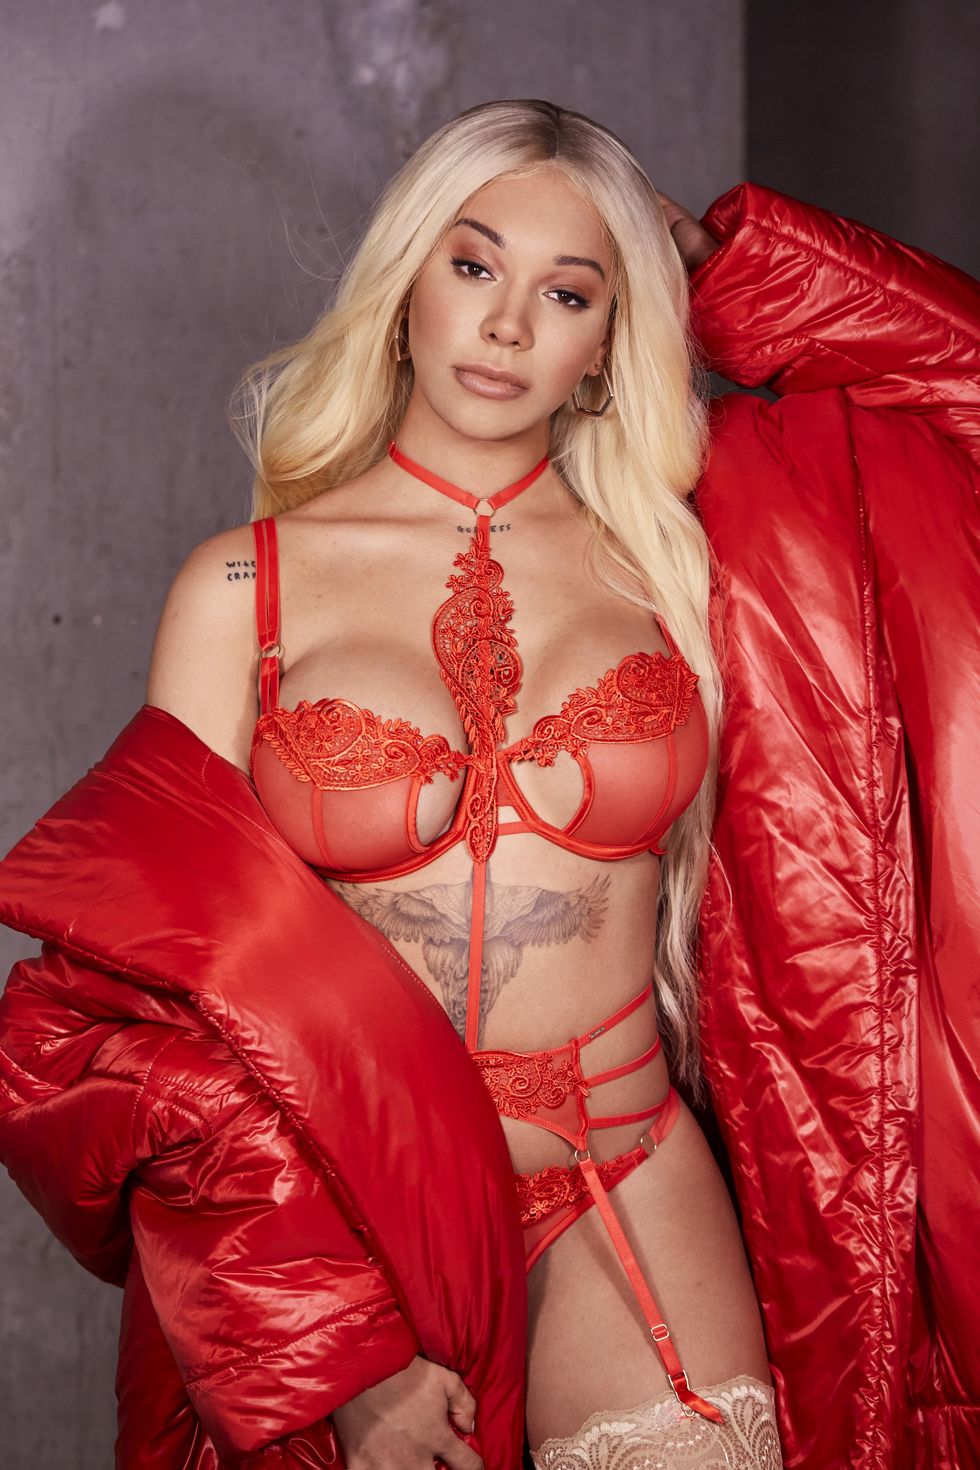 Munroe Bergdorf Is The Face Of A Lingerie Campaign